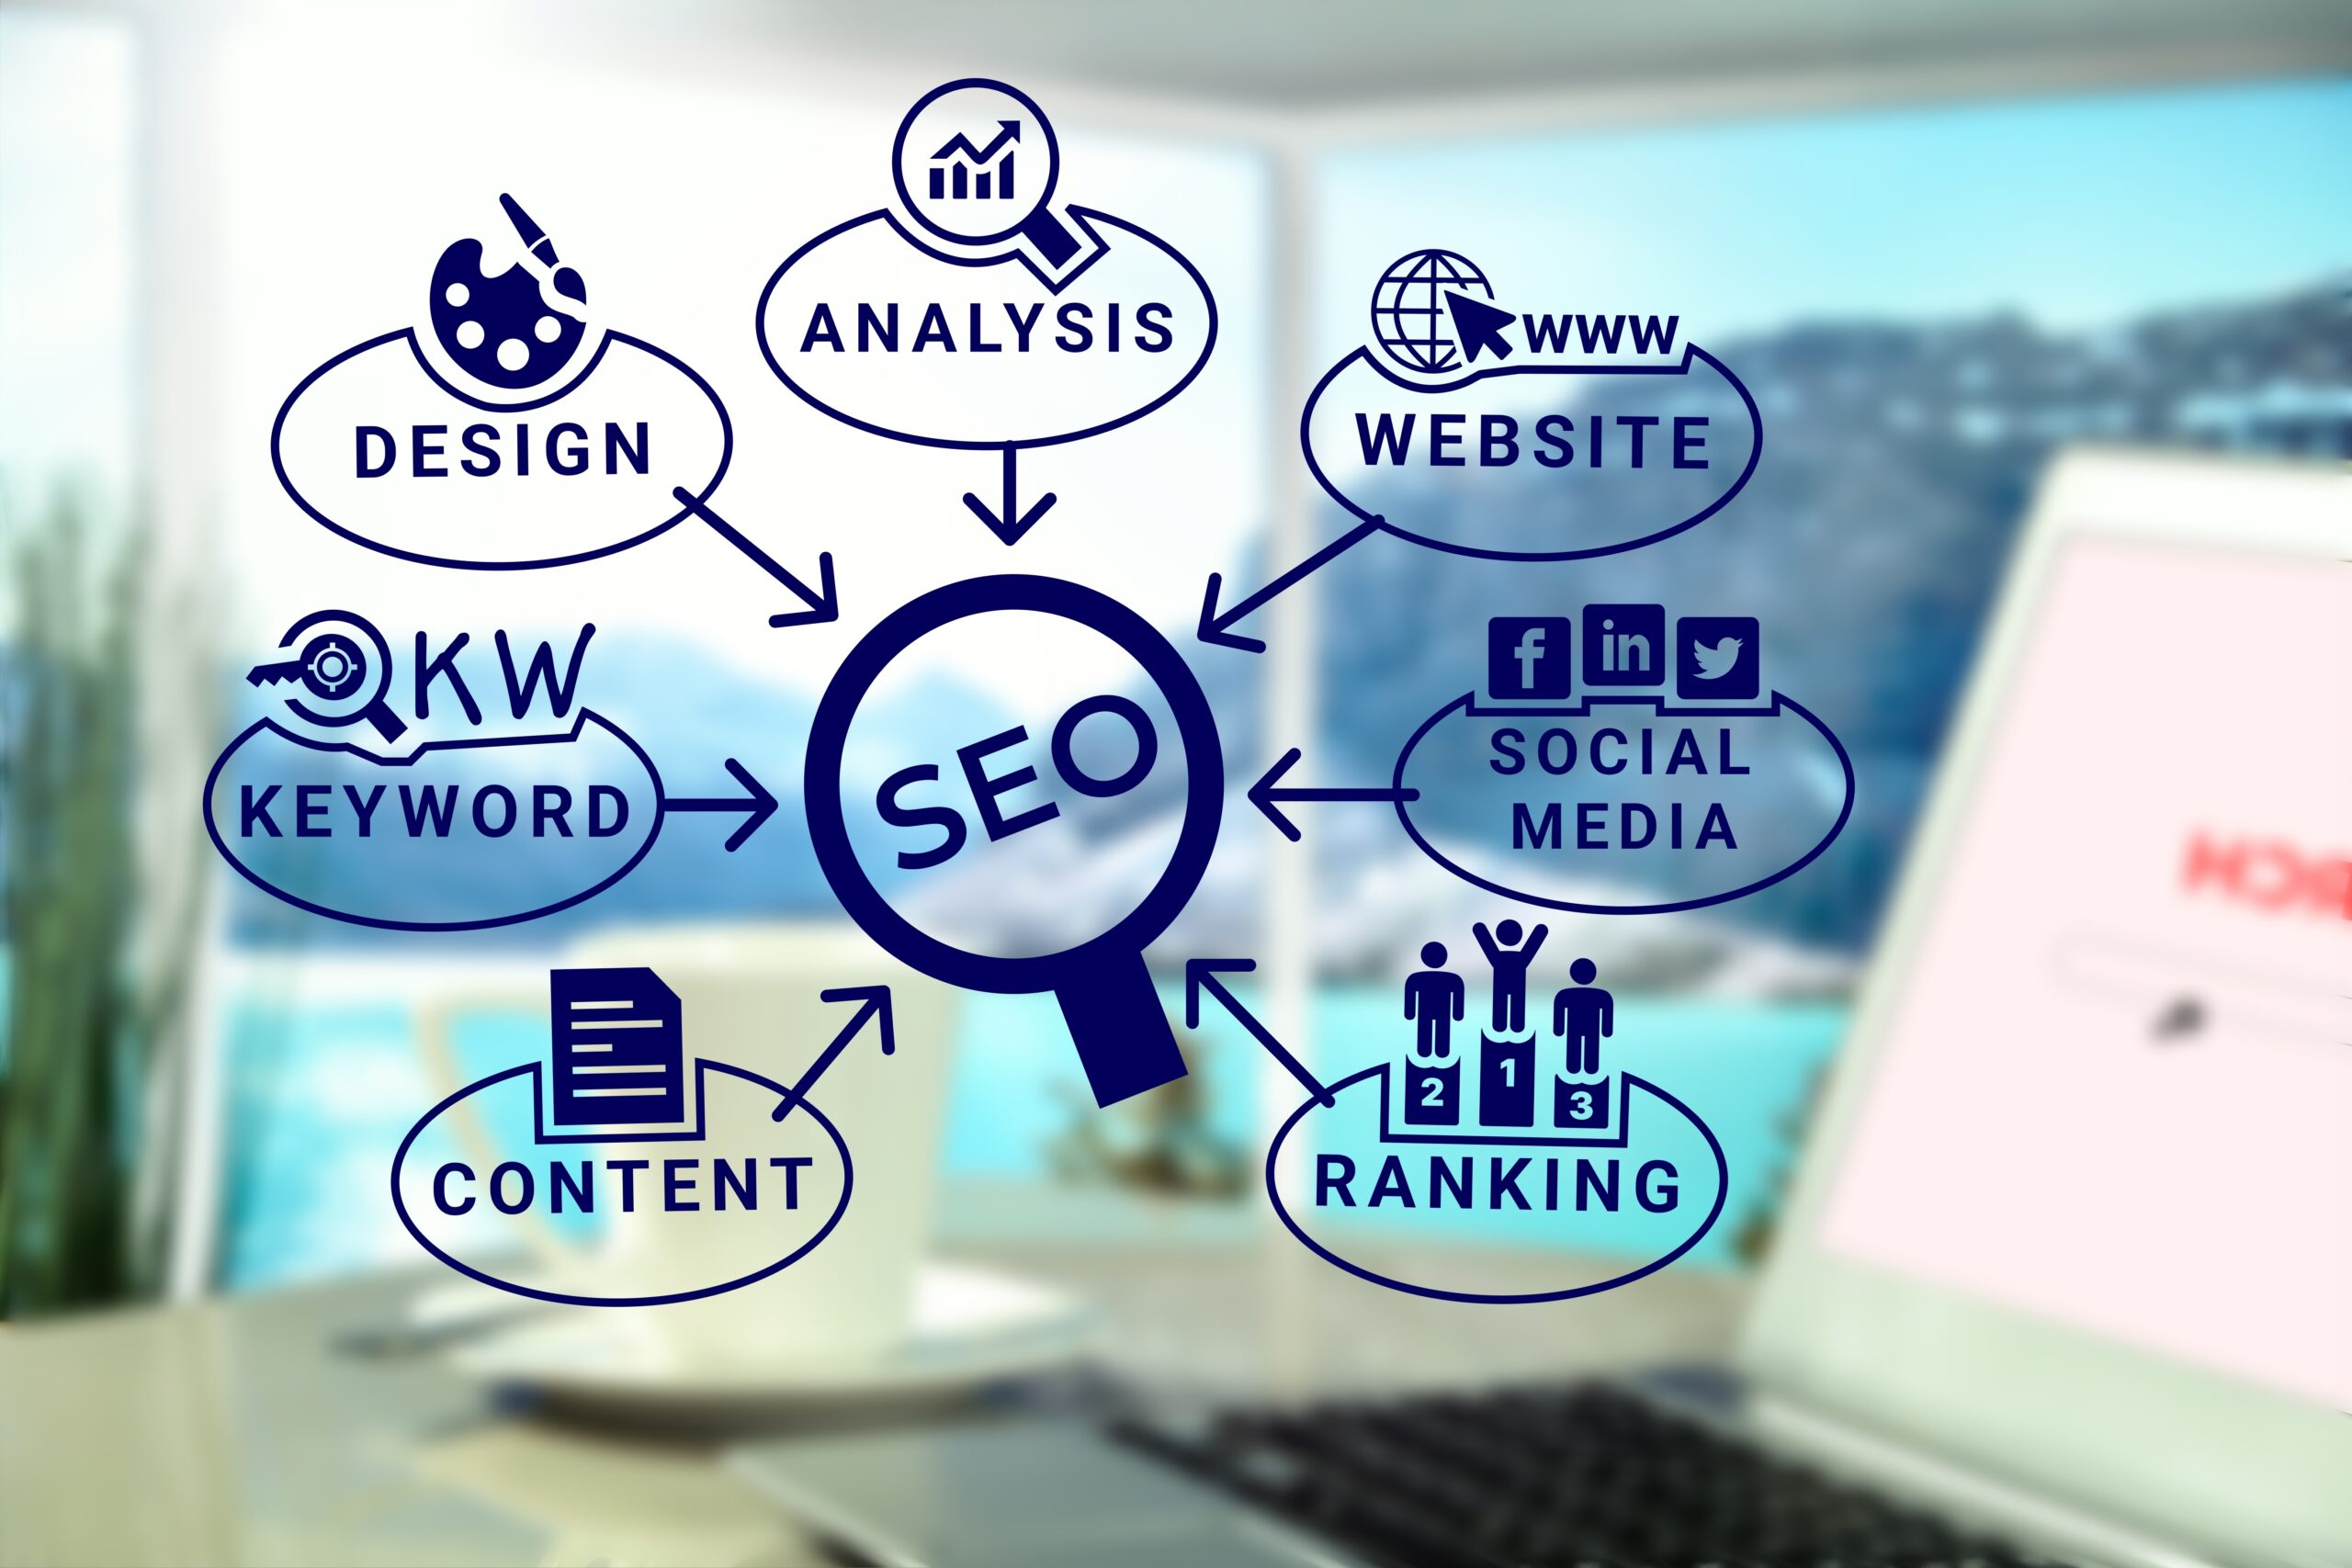 SEO Techniques and Strategies